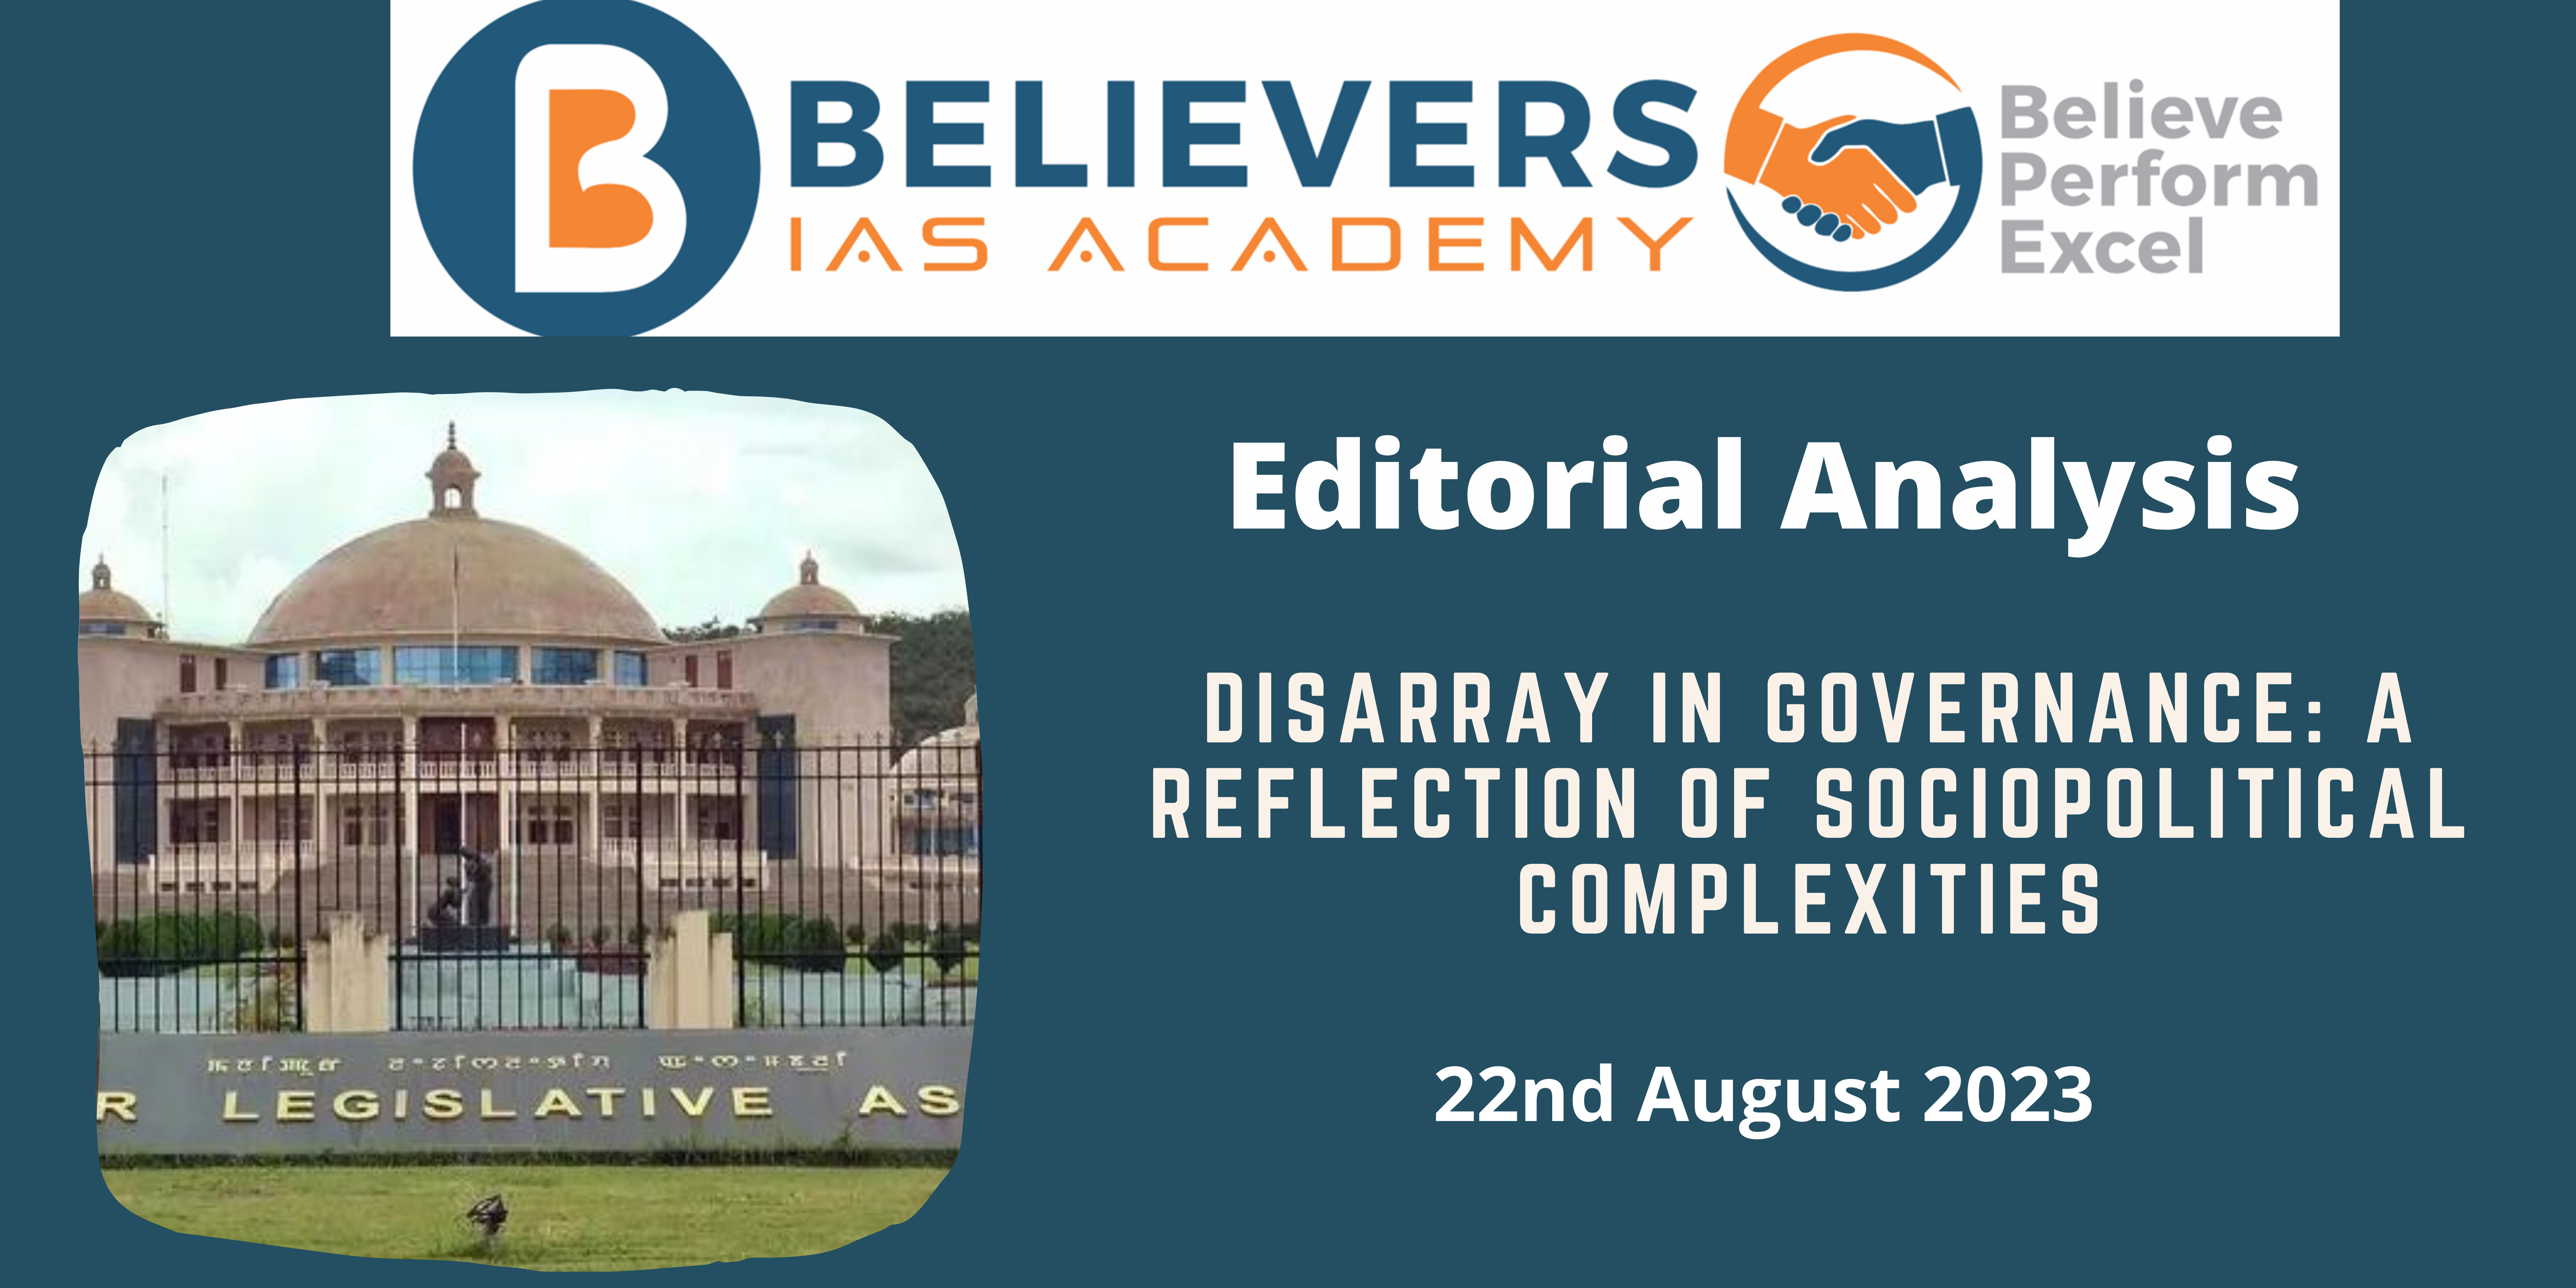 Disarray in Governance: A Reflection of Sociopolitical Complexities